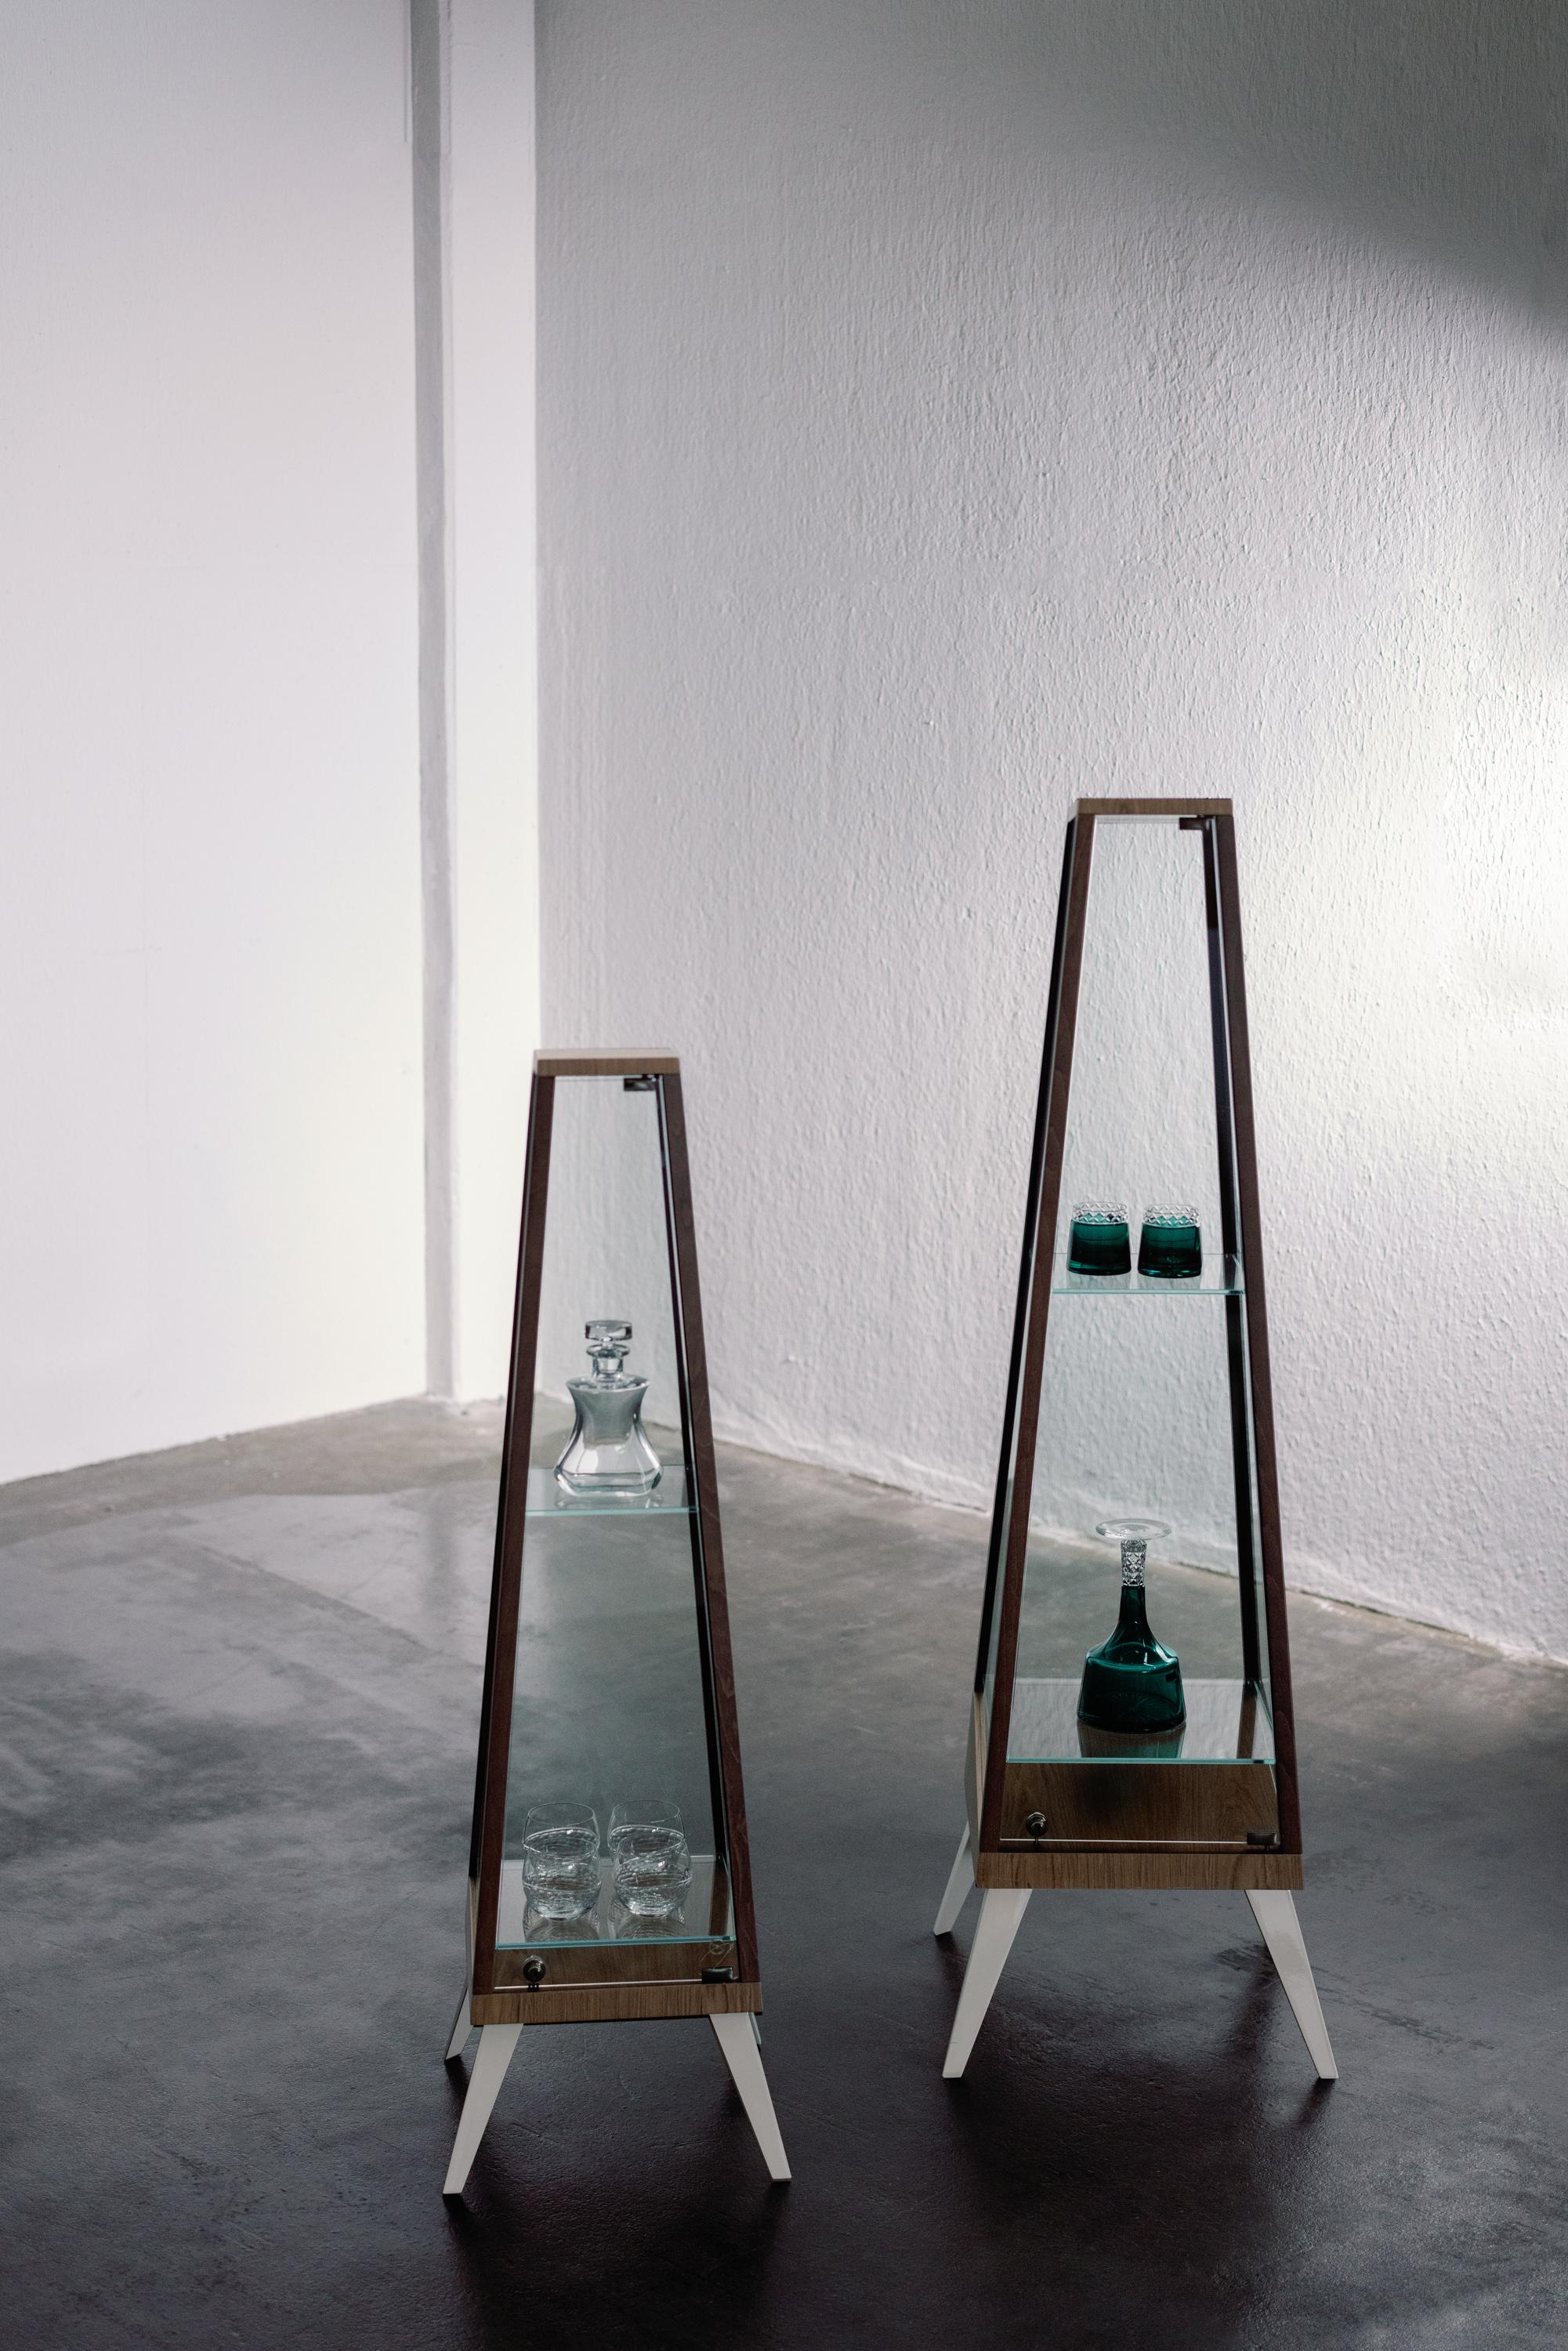 Letizia Cabinet, Modern Collection, Handcrafted in Portugal - Europe by GF Modern.

Letizia cabinet represents a concept where elegance and practicality go hand in hand. The ultra clear glass reveals the interior decorative pieces that you want to